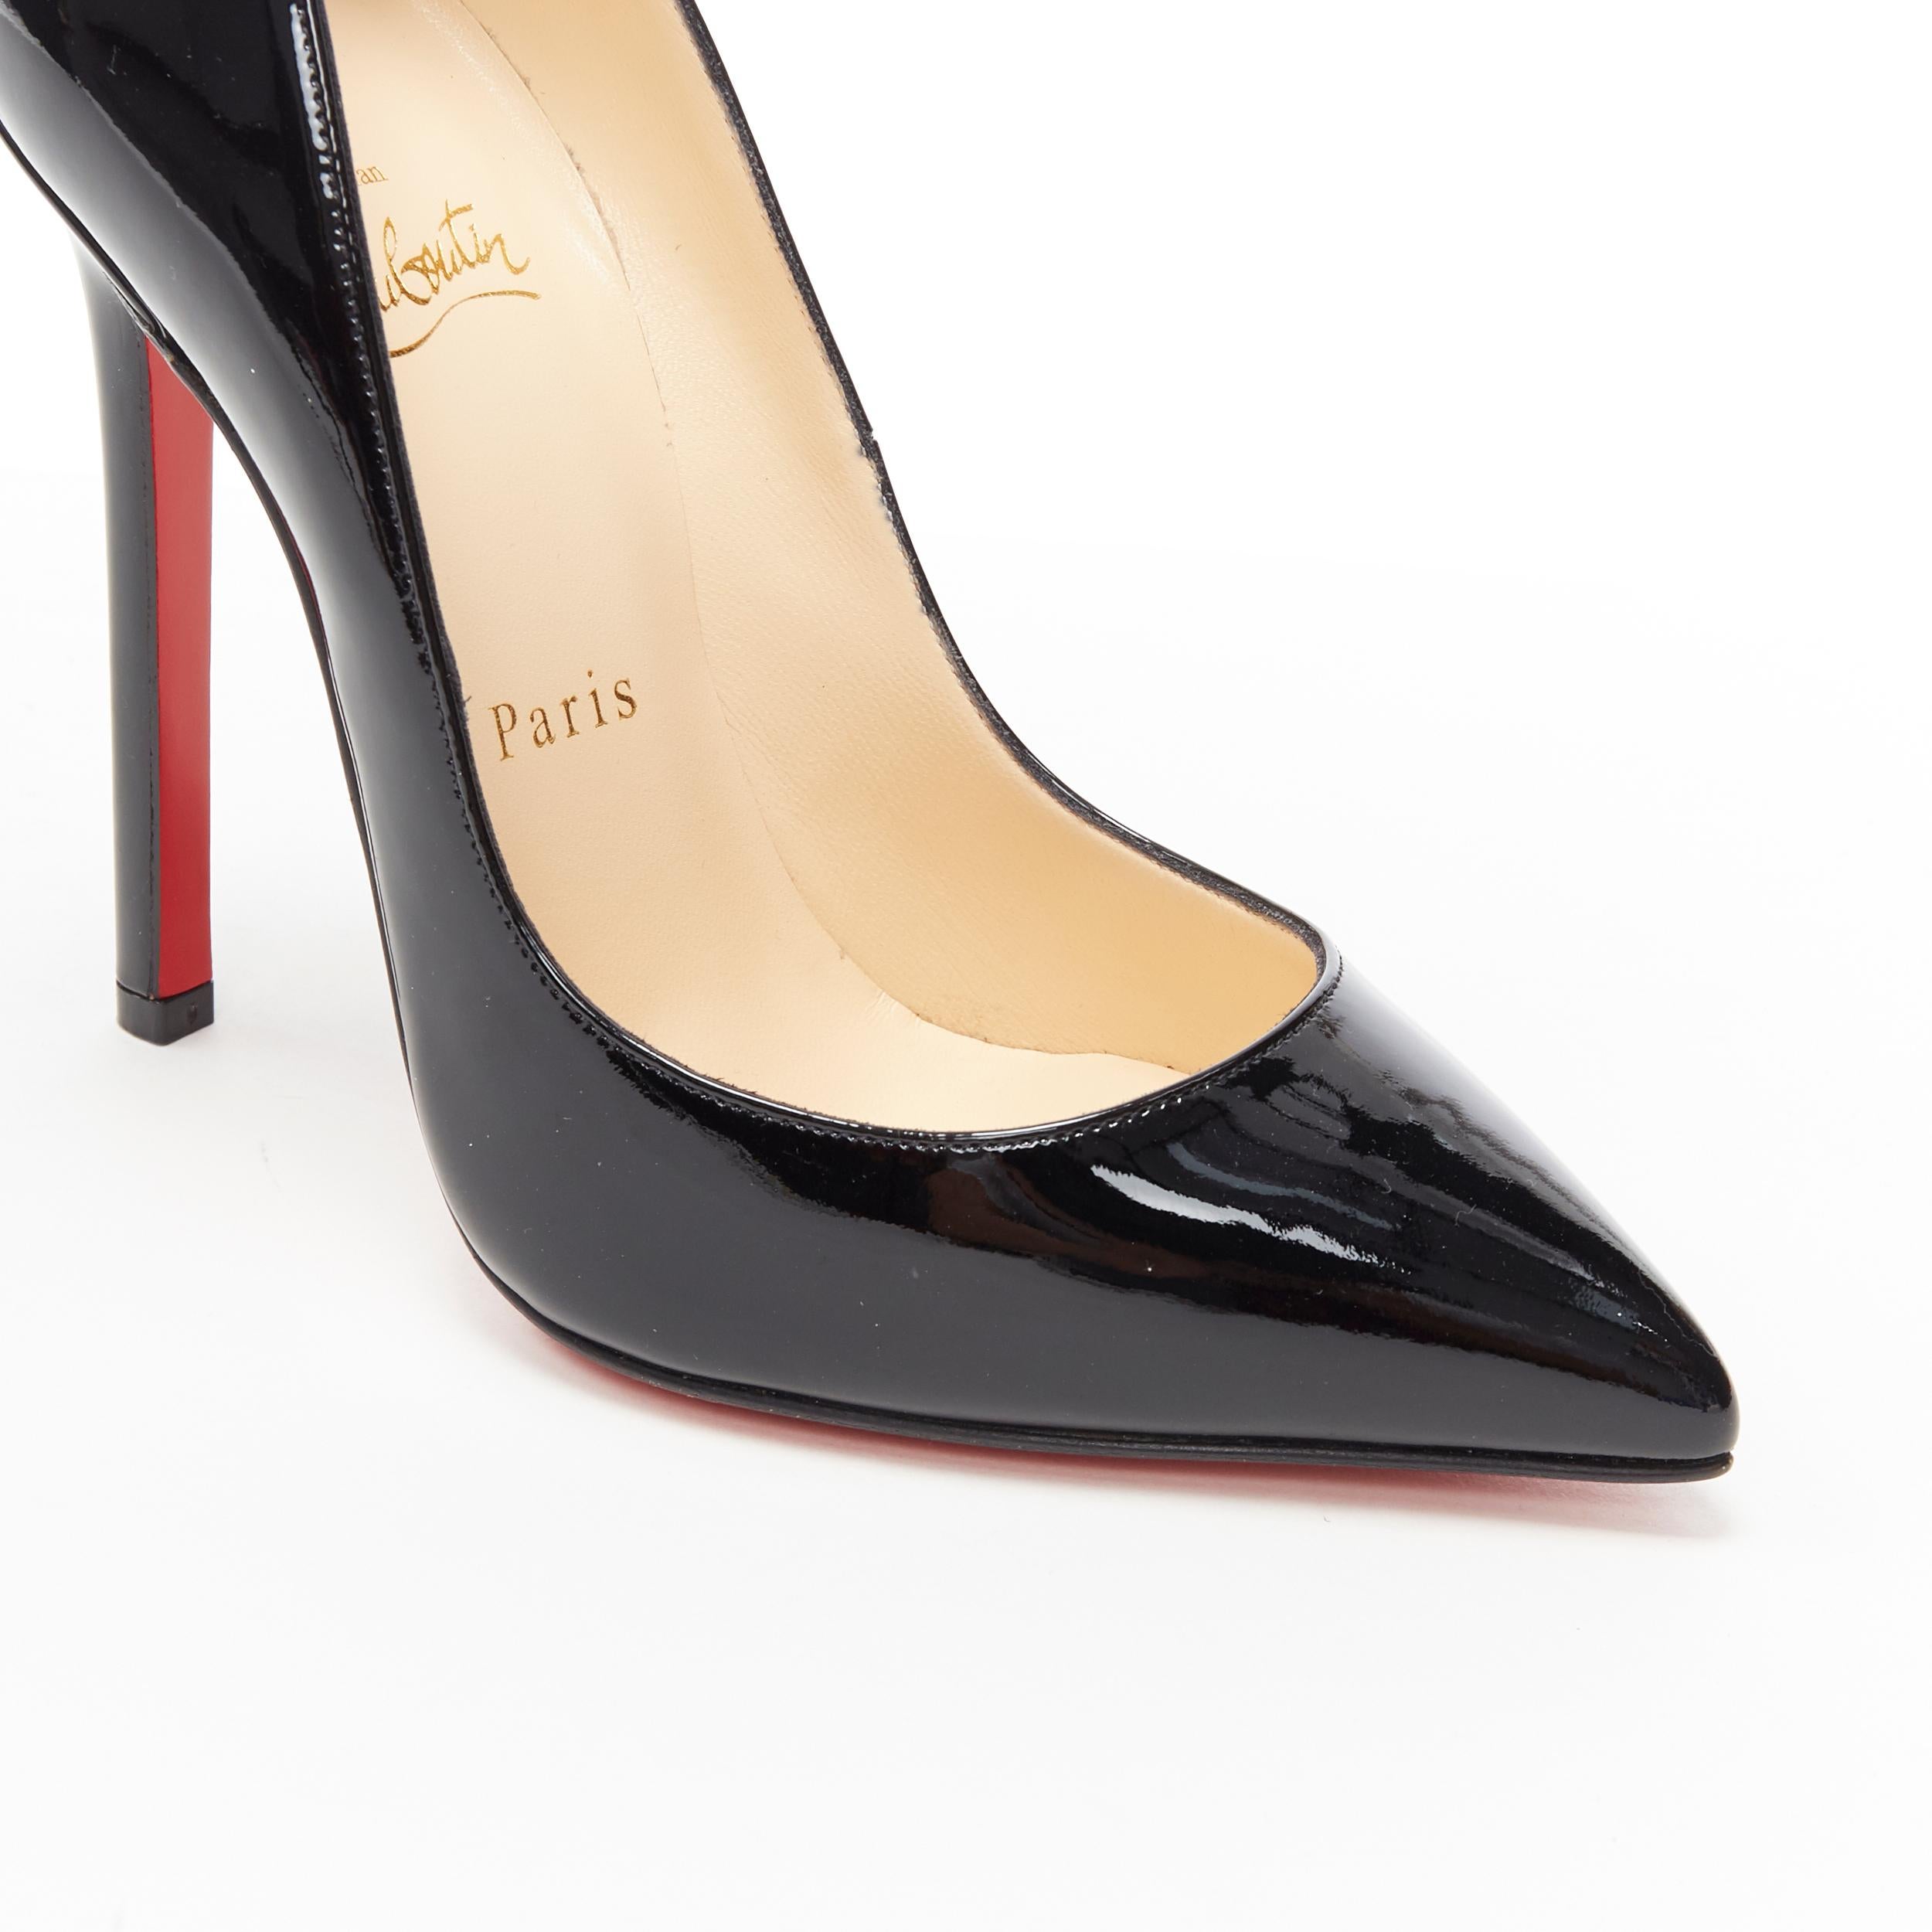 CHRISTIAN LOUBOUTIN black patent pointed toe pigalle high heel pump EU36.5 3